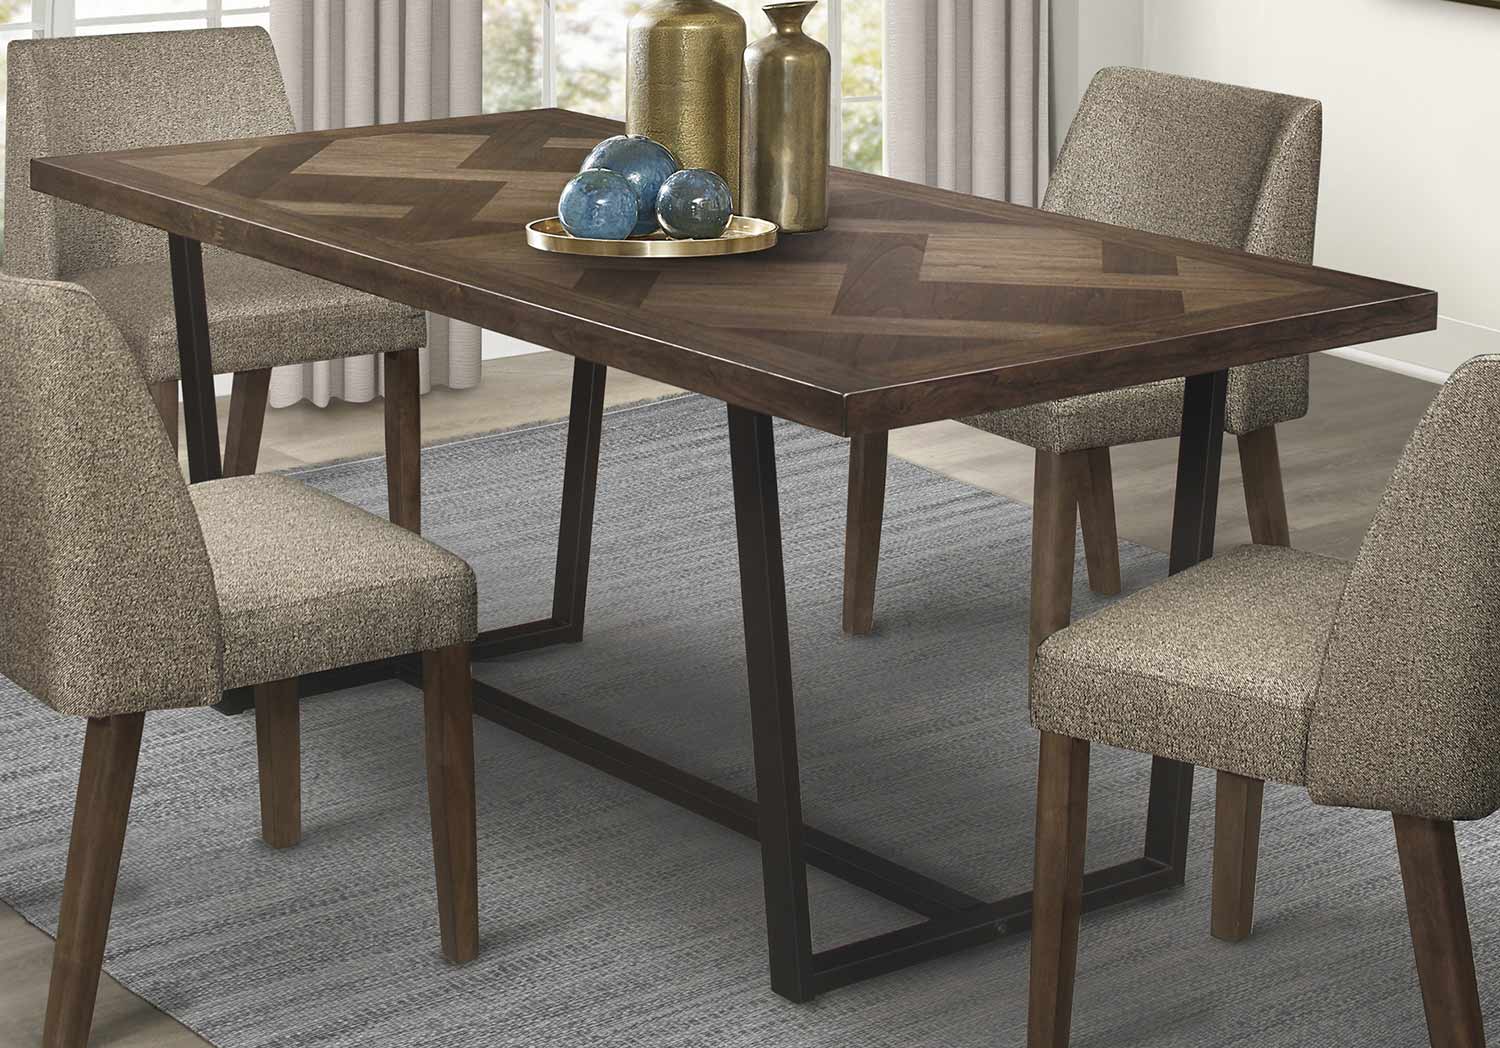 Homelegance Leland Dining Table - Warm Brown and Black